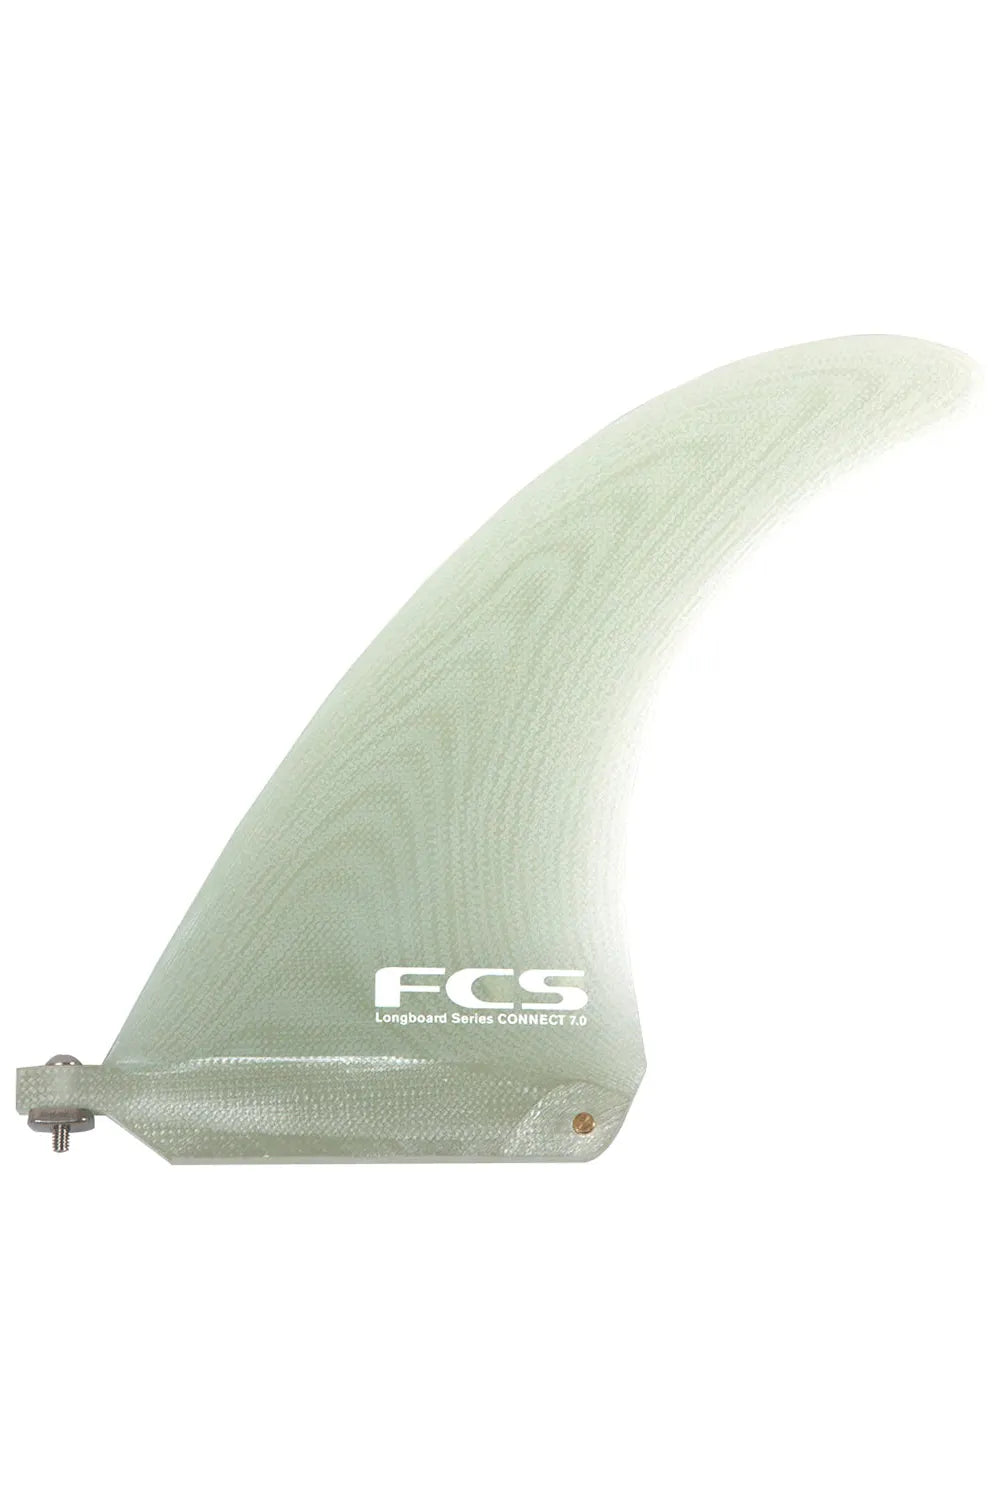 FCS Connect Screw & Plate Pg 7” Fin